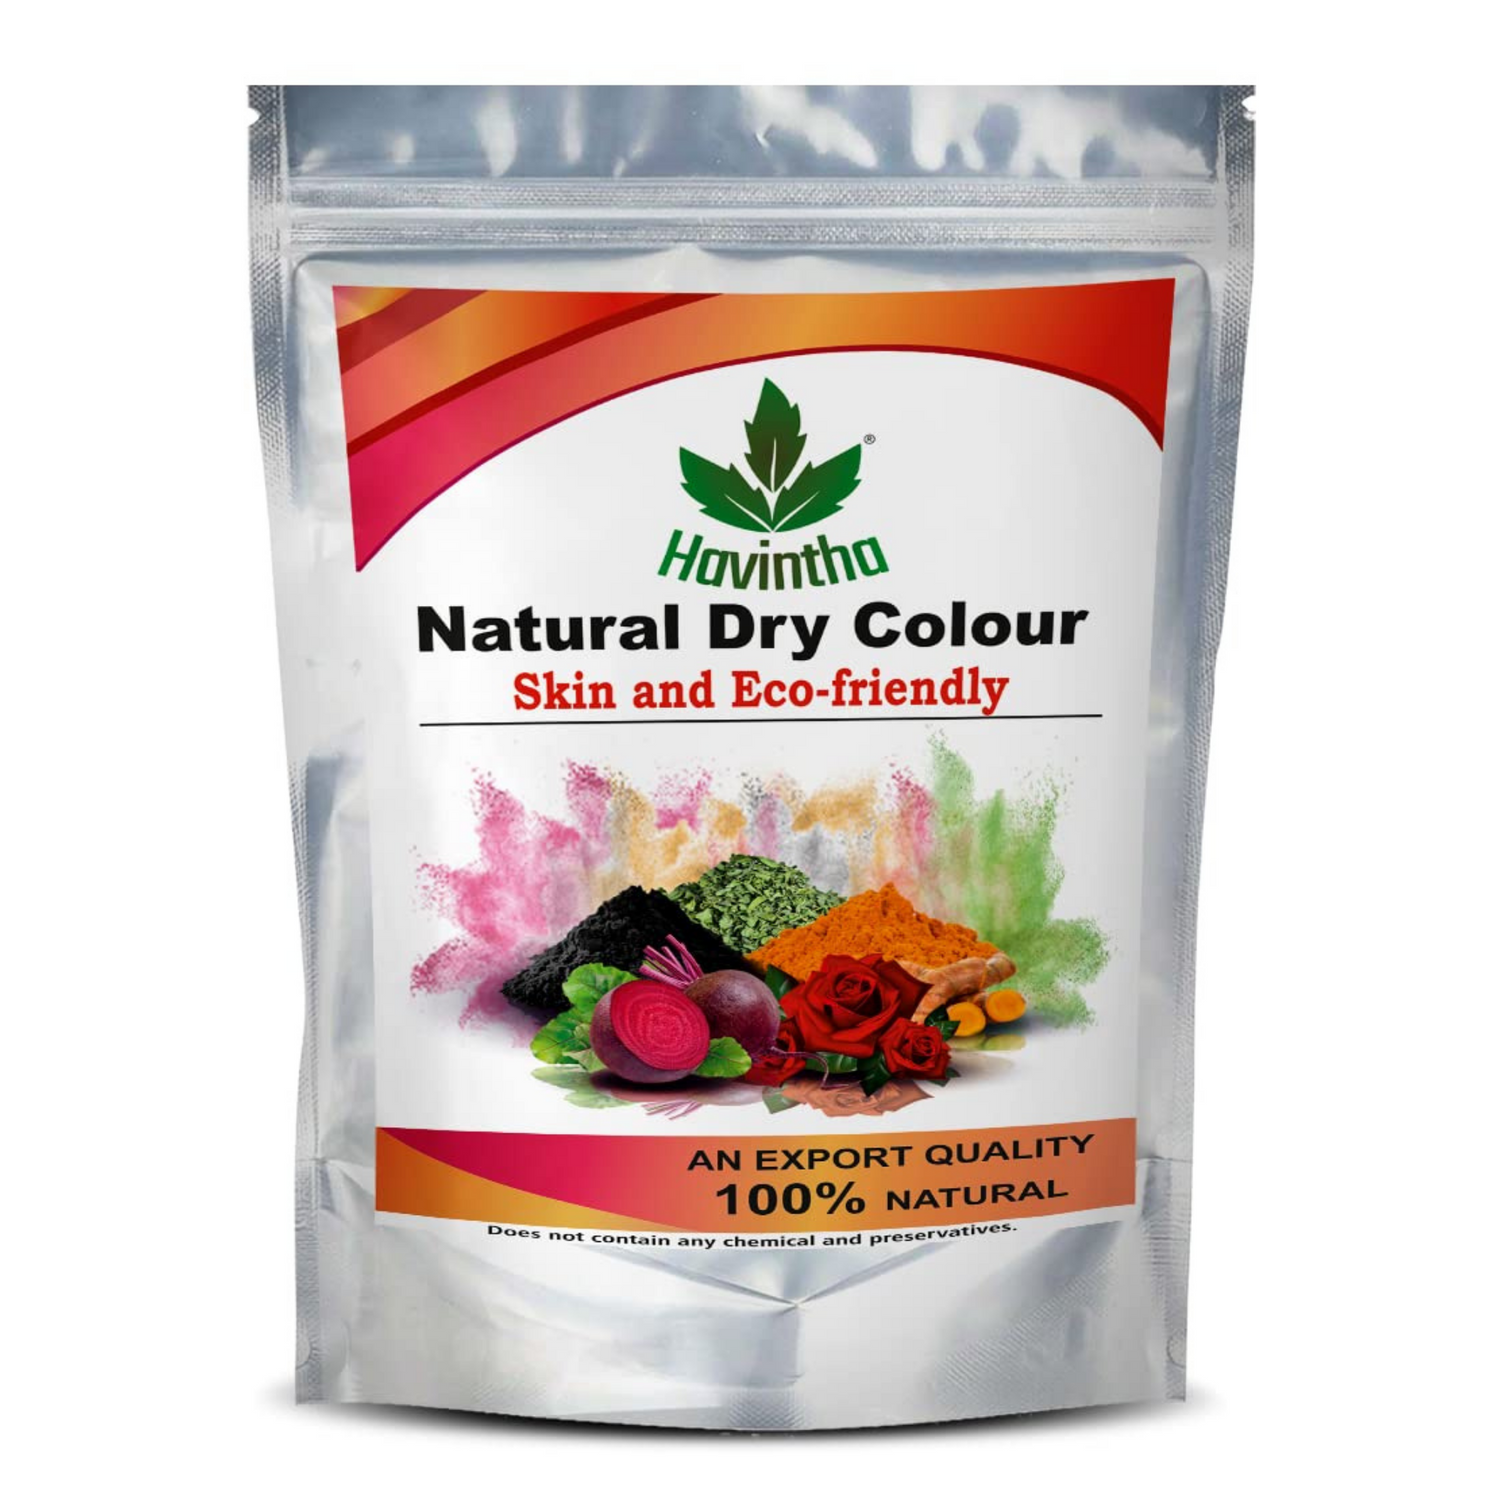 Havintha Natural Dry Holi Colours | Good for Your Skin | Edible Grade Items | 4 Organic Colors (Each 100 g) (Red, Yellow, Magenta, Black) - 14 oz | 0.8 lb | 400 gm